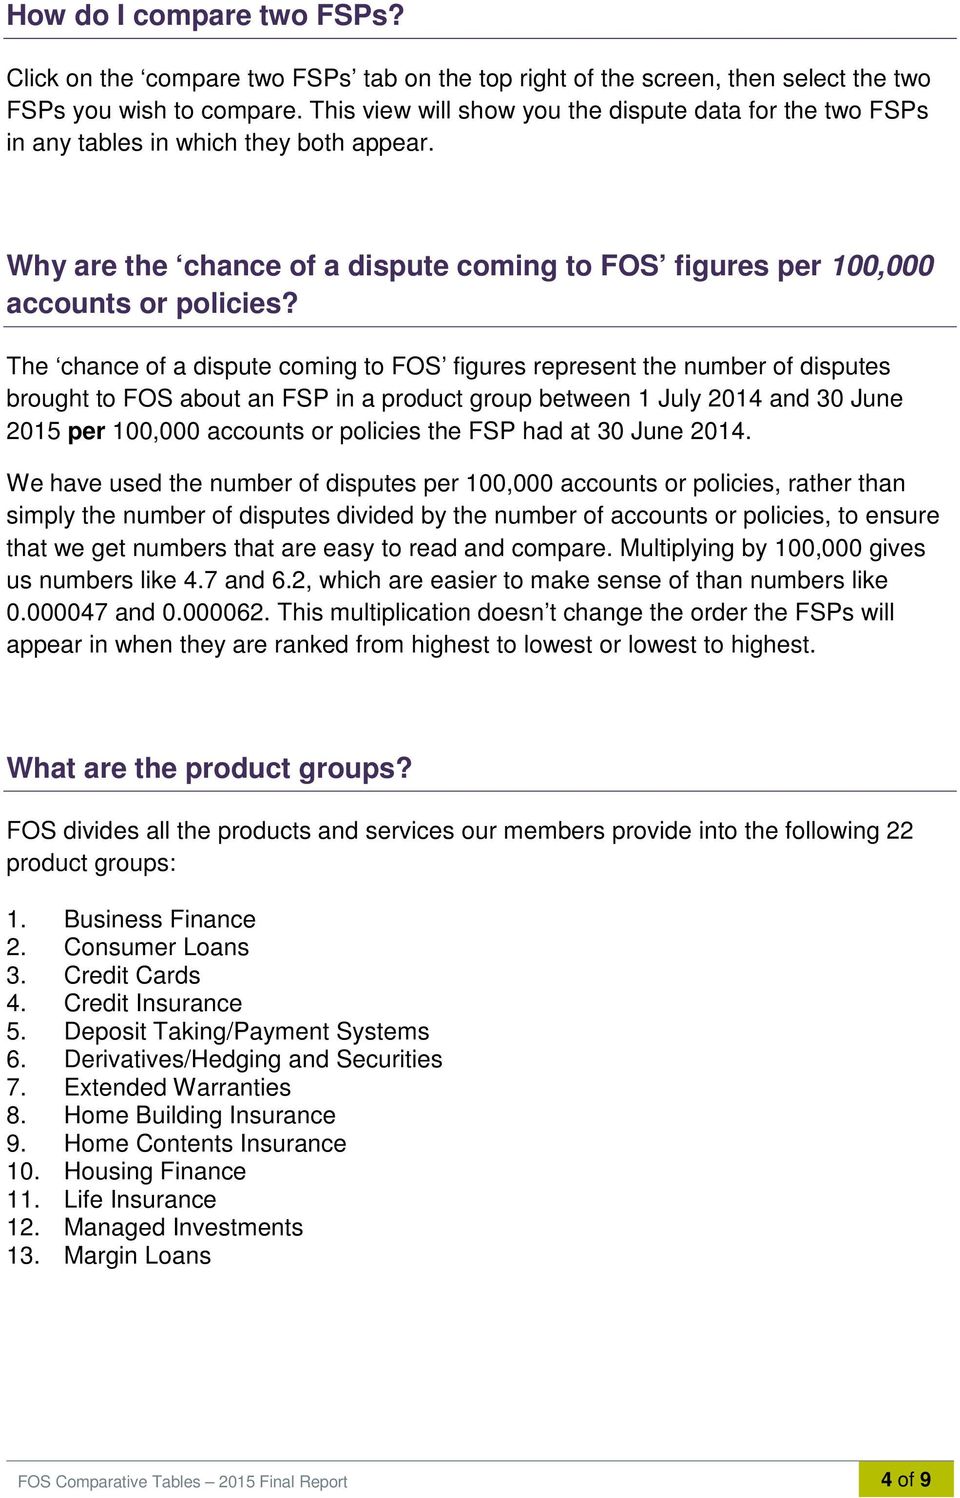 The chance of a dispute coming to FOS figures represent the number of disputes brought to FOS about an FSP in a product group between 1 July 2014 and 30 June 2015 per 100,000 accounts or policies the